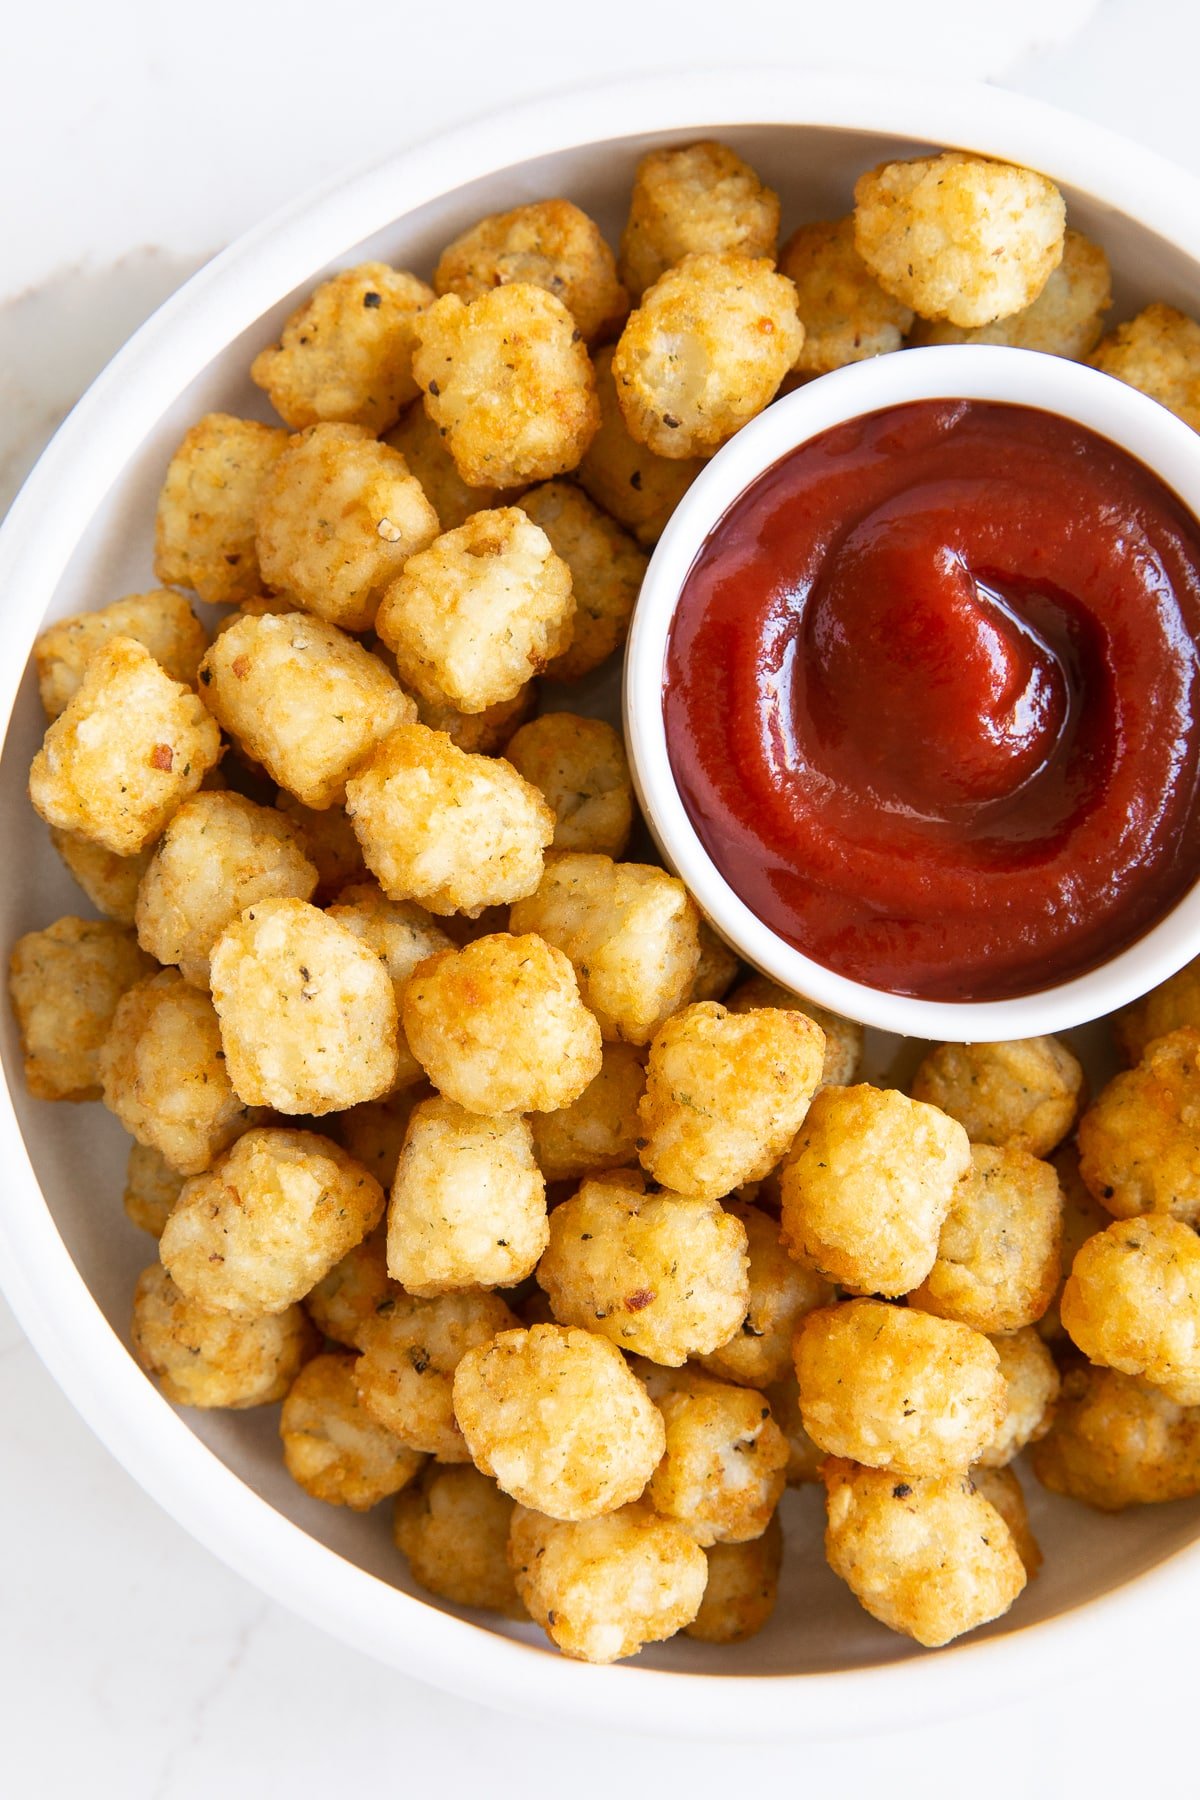 Round shallow plate filled with air fryer tater tots and a small bowl of ketchup.